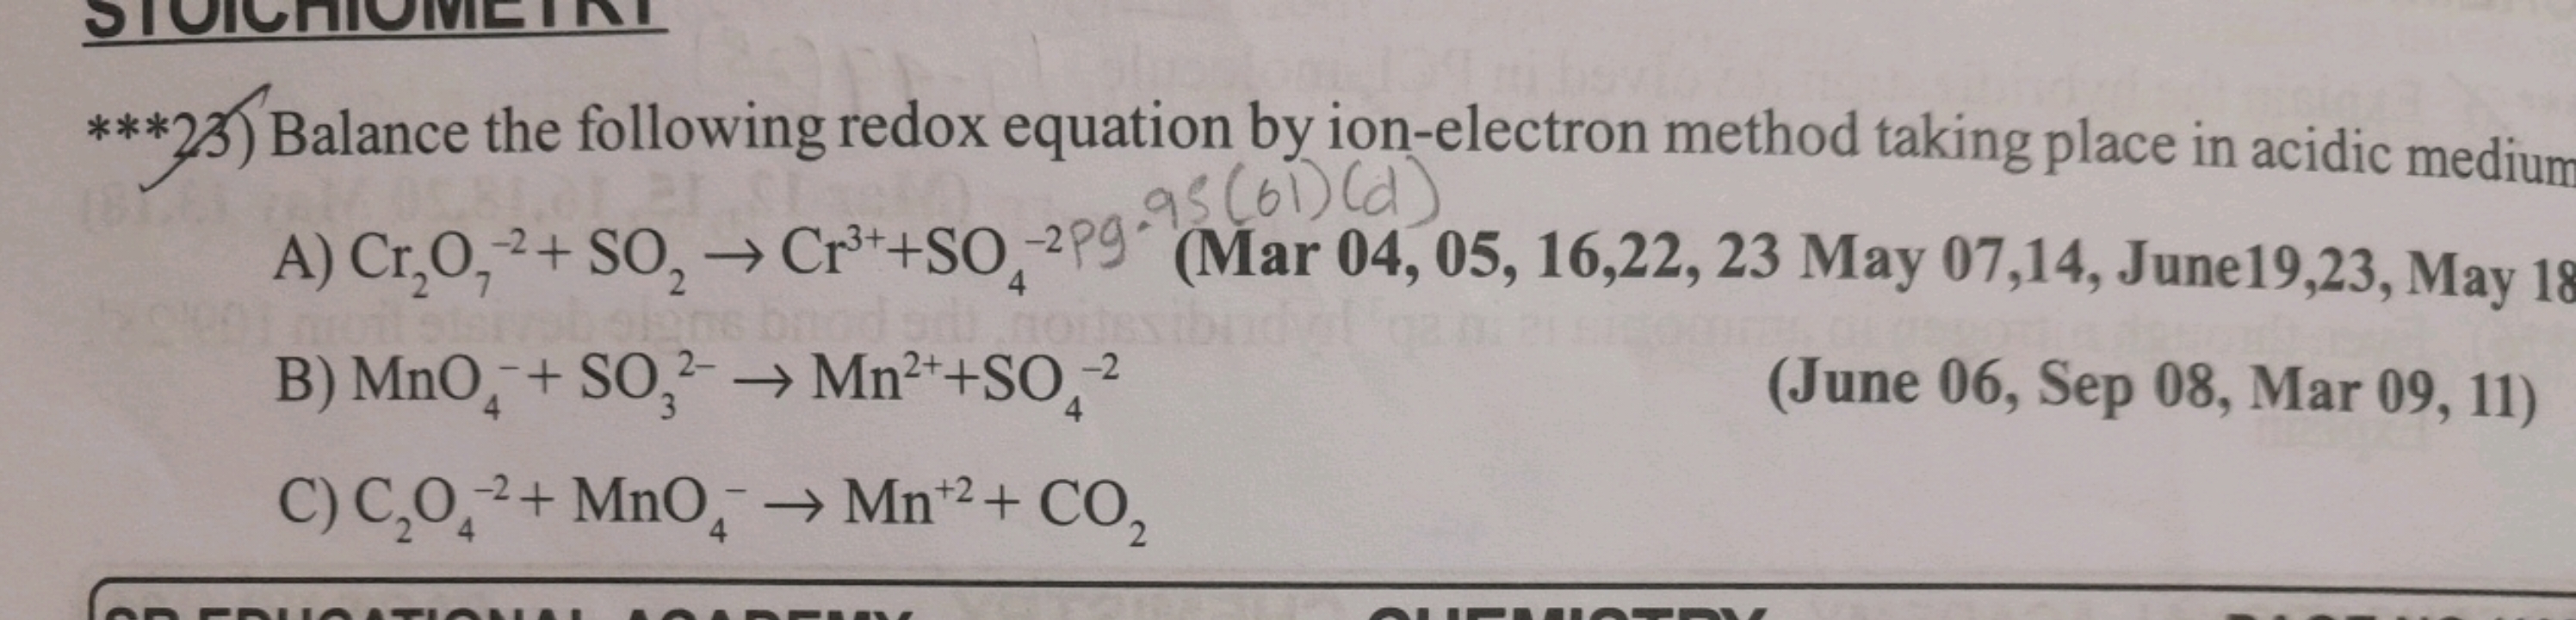 23) Balance the following redox equation by ion-electron method taking